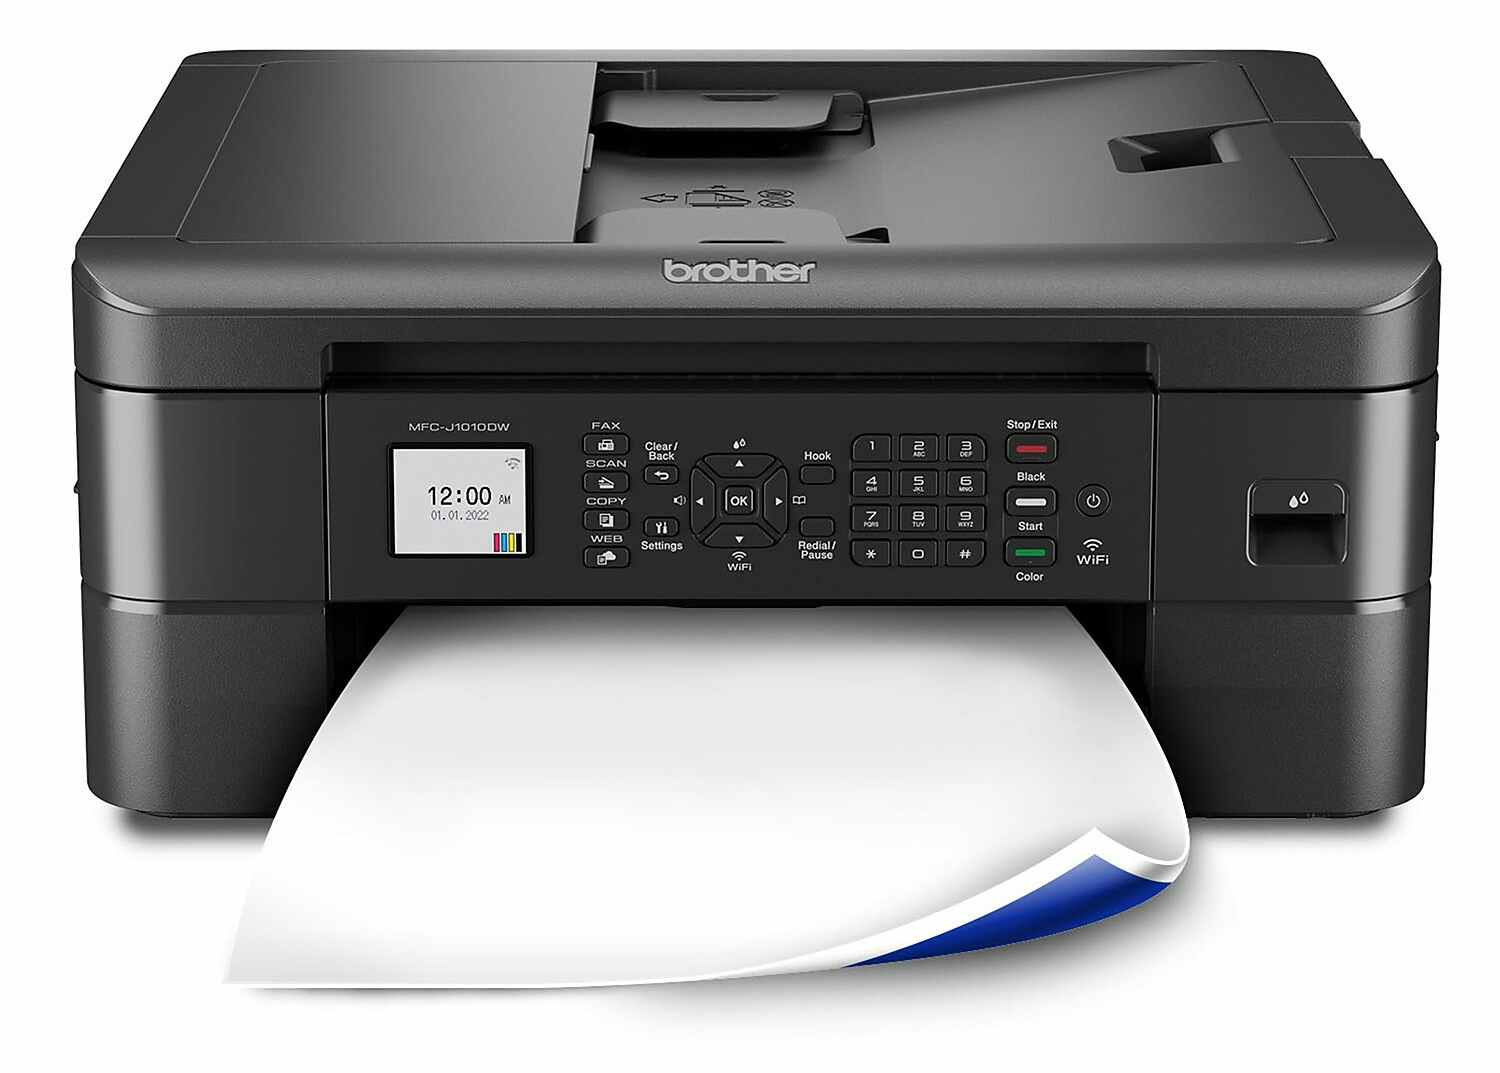 best for students: Brother MFCJ1010DW Wireless Color All-in-One Inkjet Printer